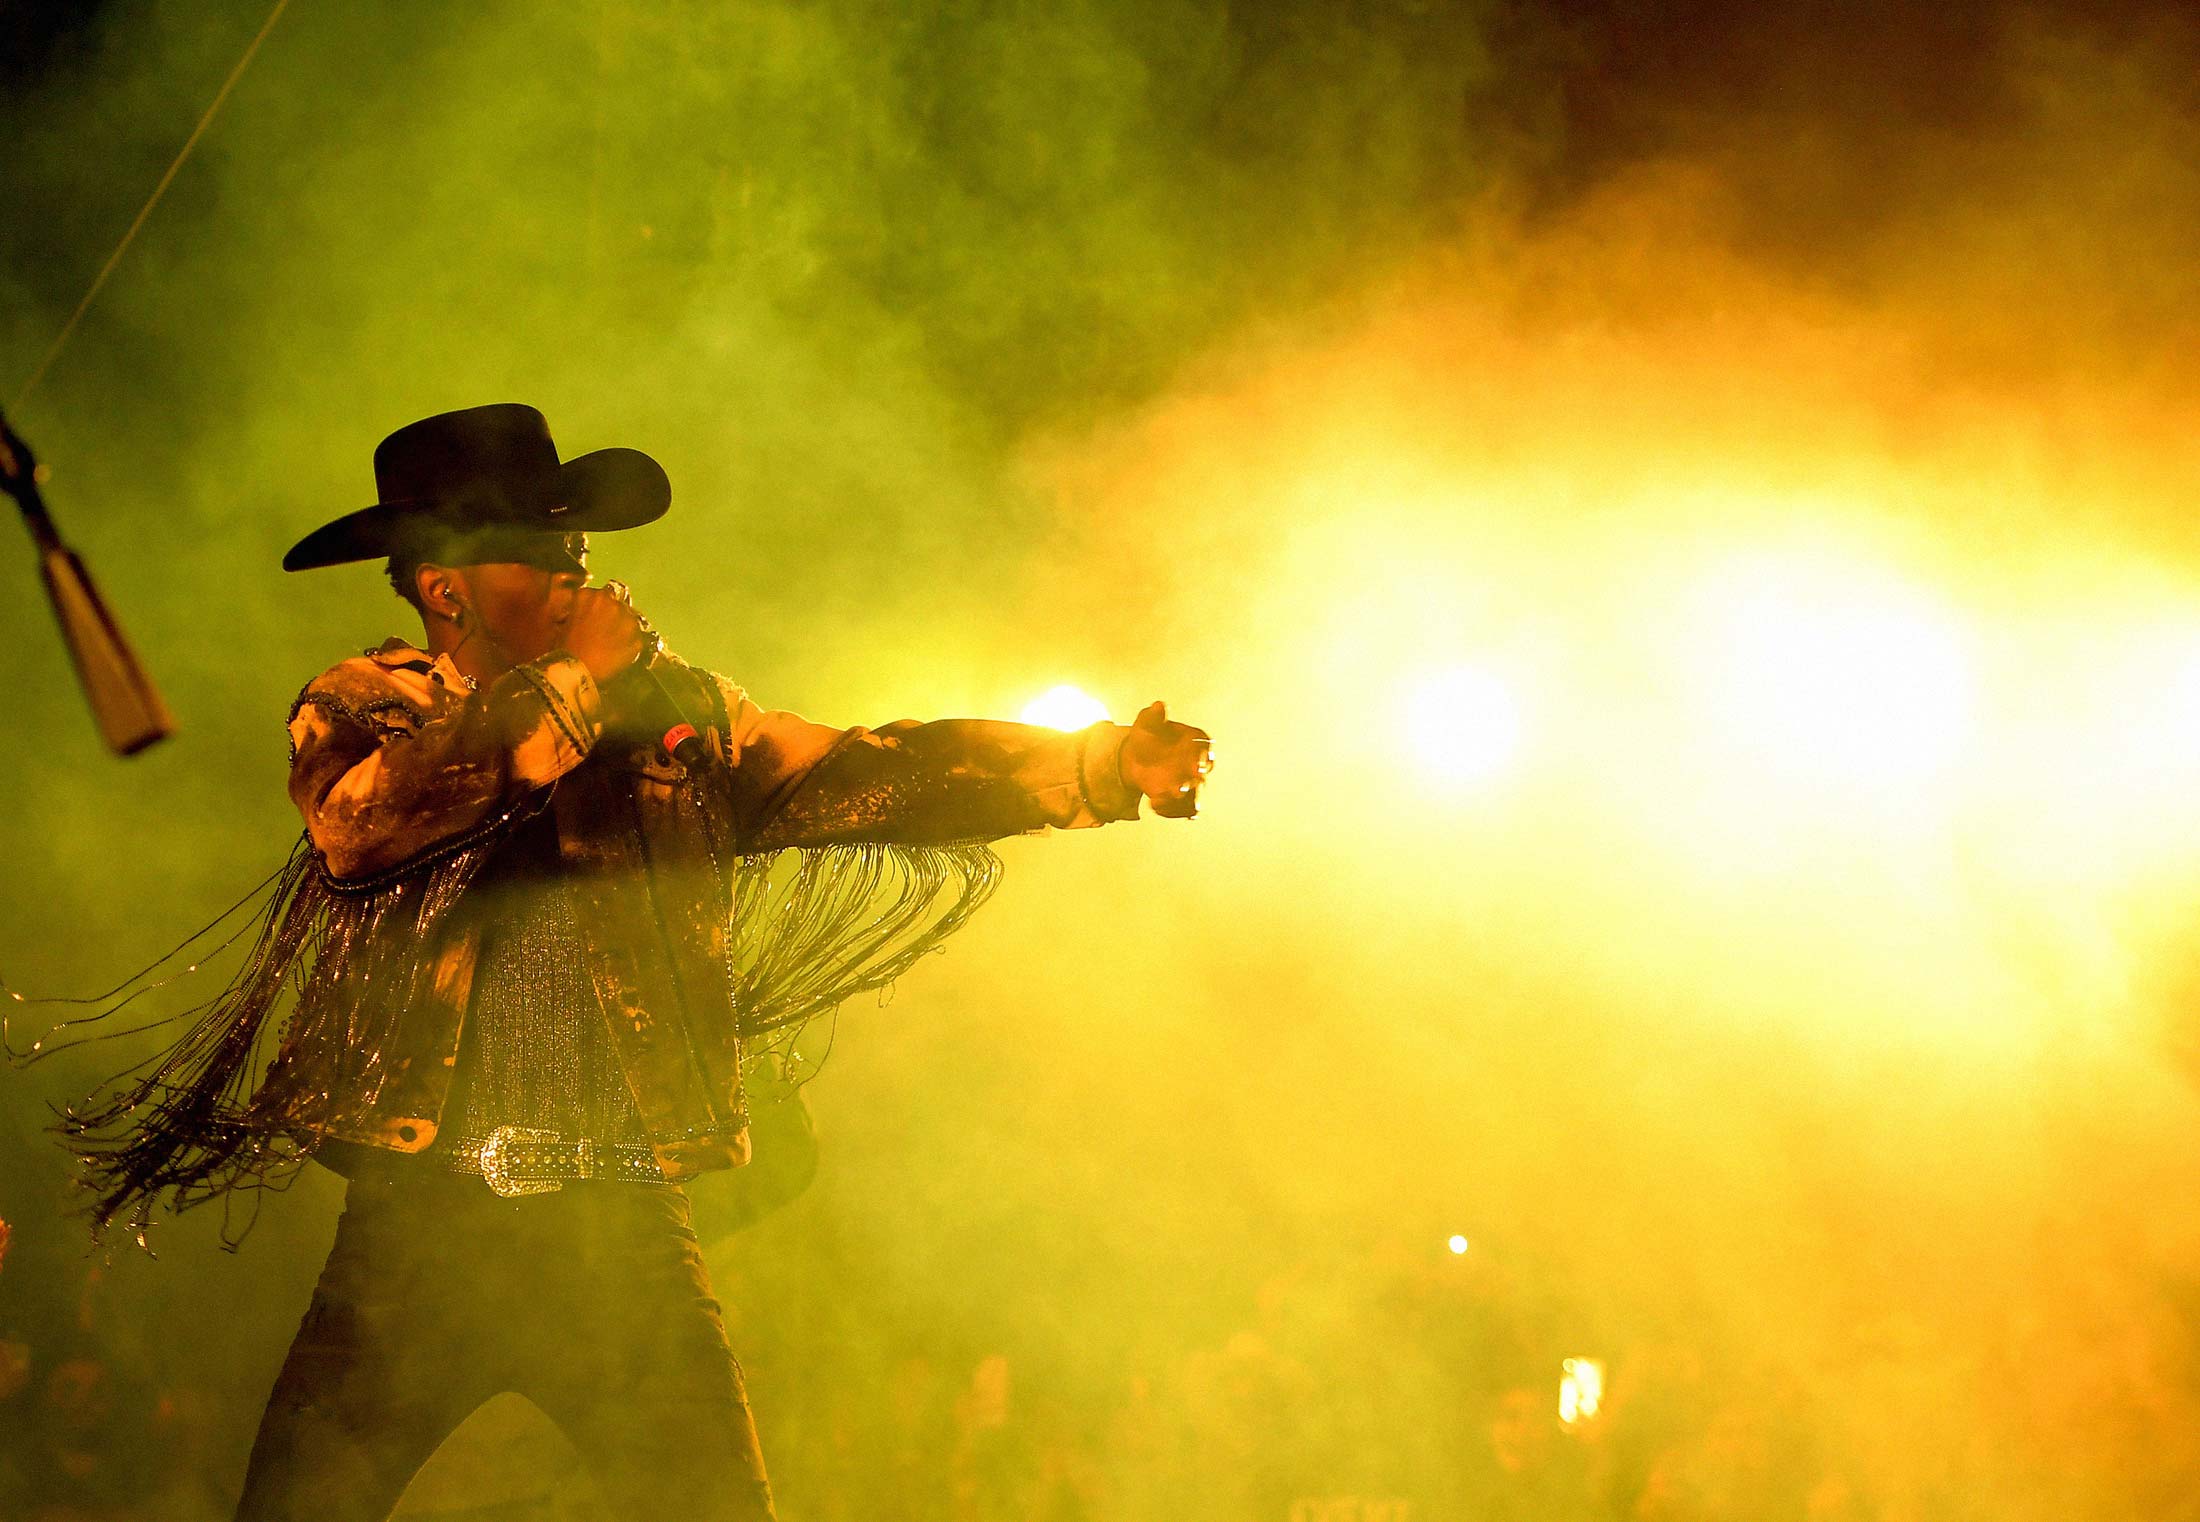 Lil Nas X performs onstage during the 2019 Stagecoach Festival at Empire Polo Field in Indio, Calif.,&nbsp;on April 28, 2019.&nbsp;